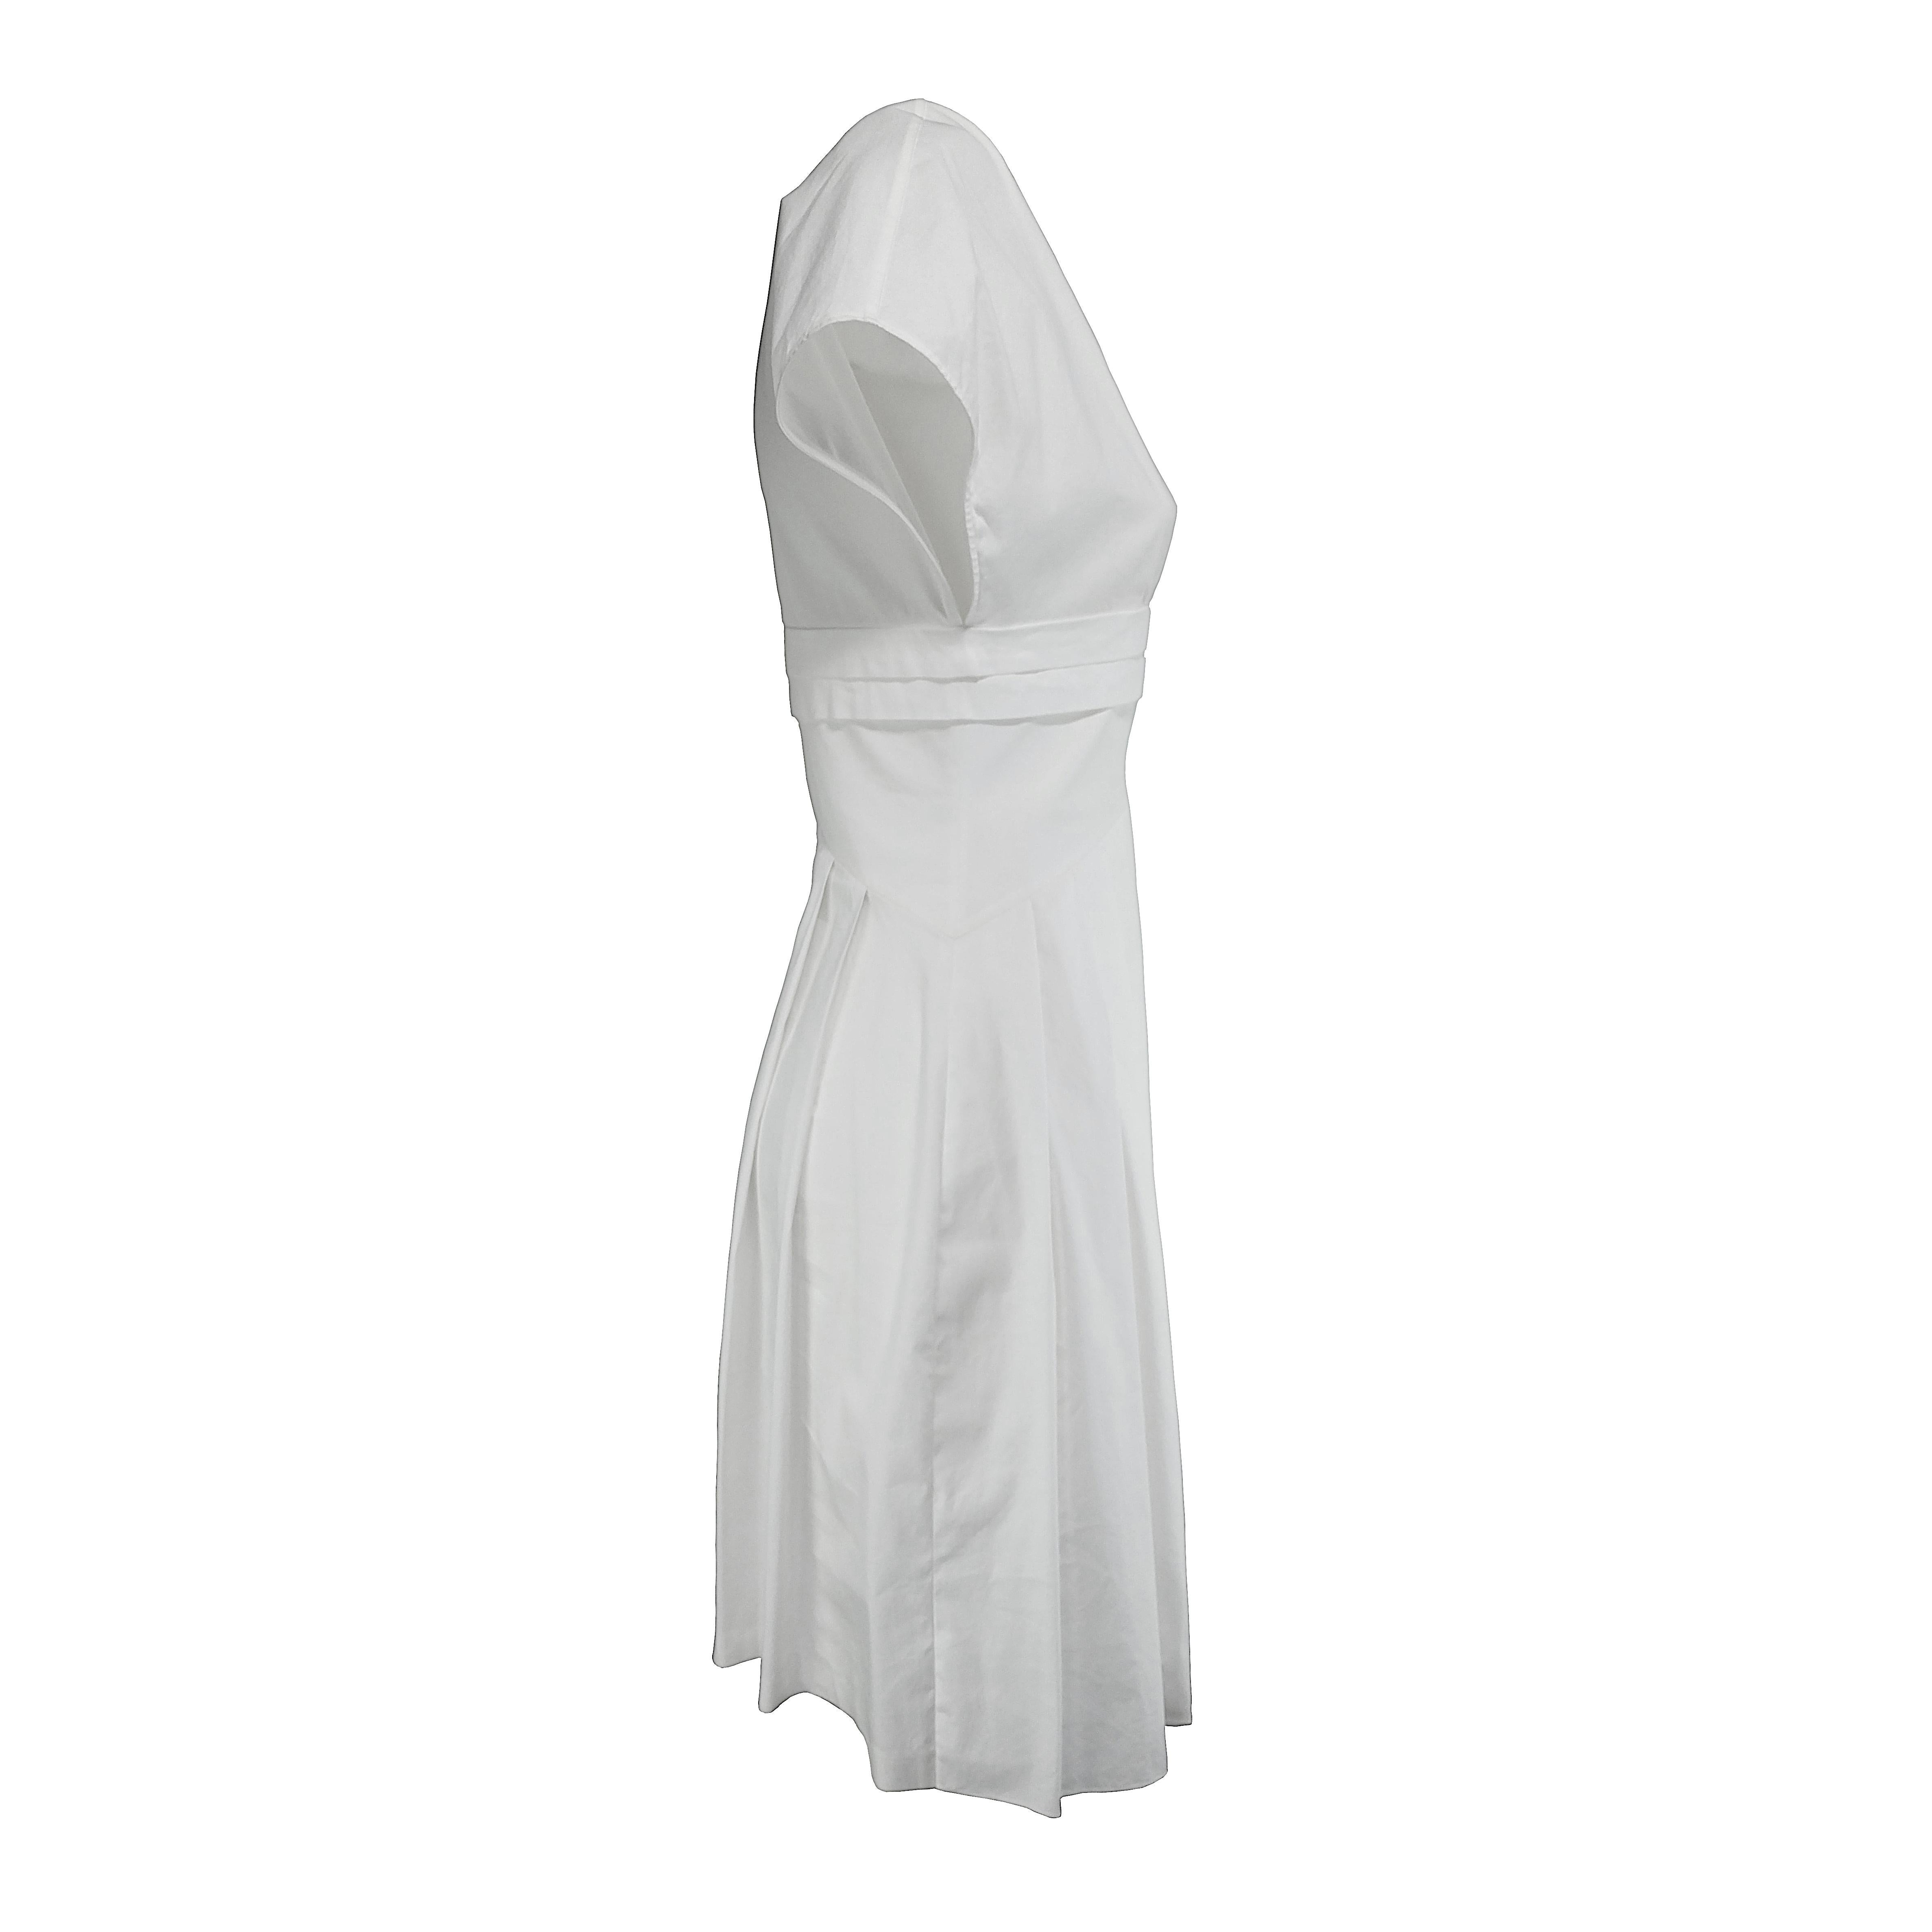 Crafted in white cotton, this dress by Christian Dior will help you building a timeless wardrobe of elevated yet understated styles. Based on a sophisticated design, it features kimono short-sleeves, a V-neckline and a flared silhouette enhanced by